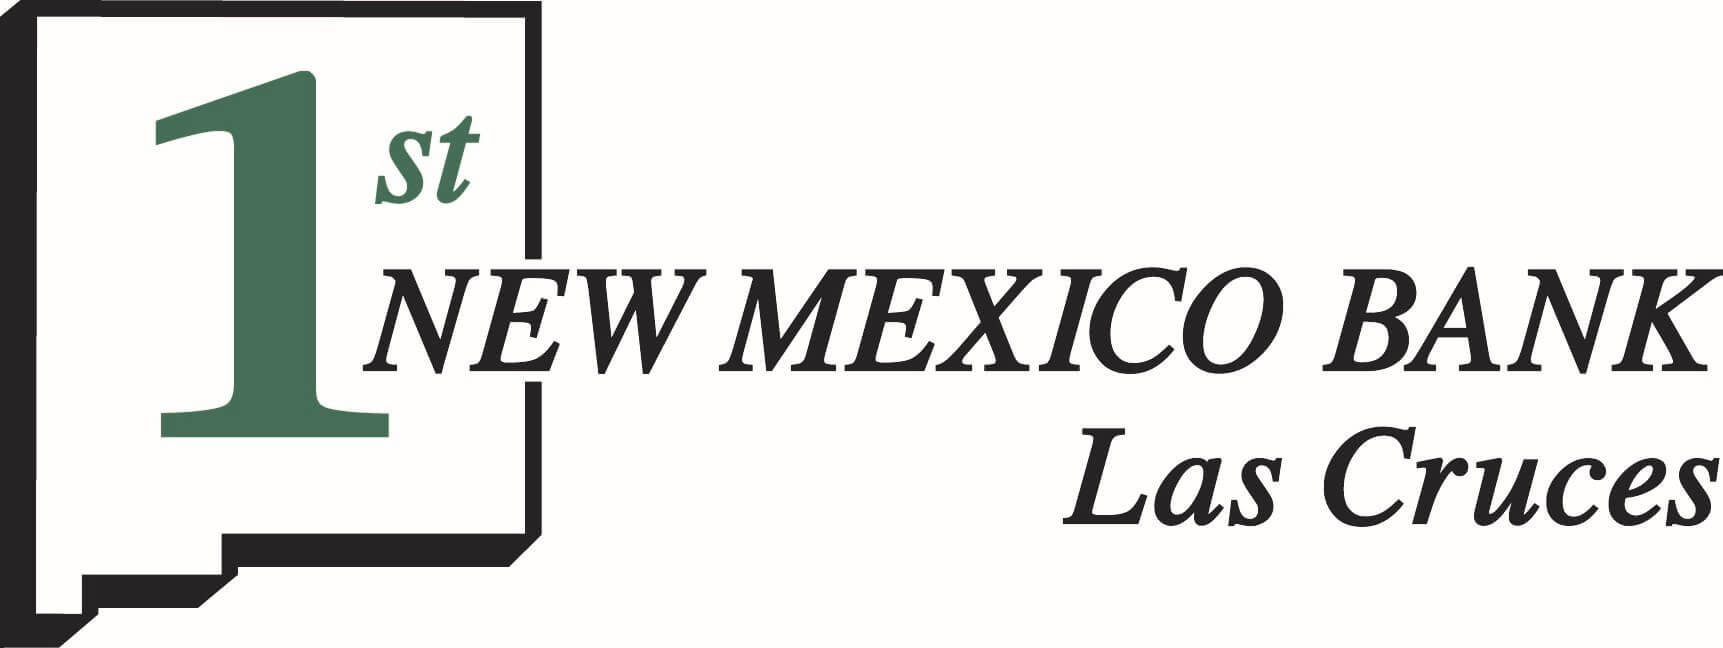 1st New Mexico bank las cruces